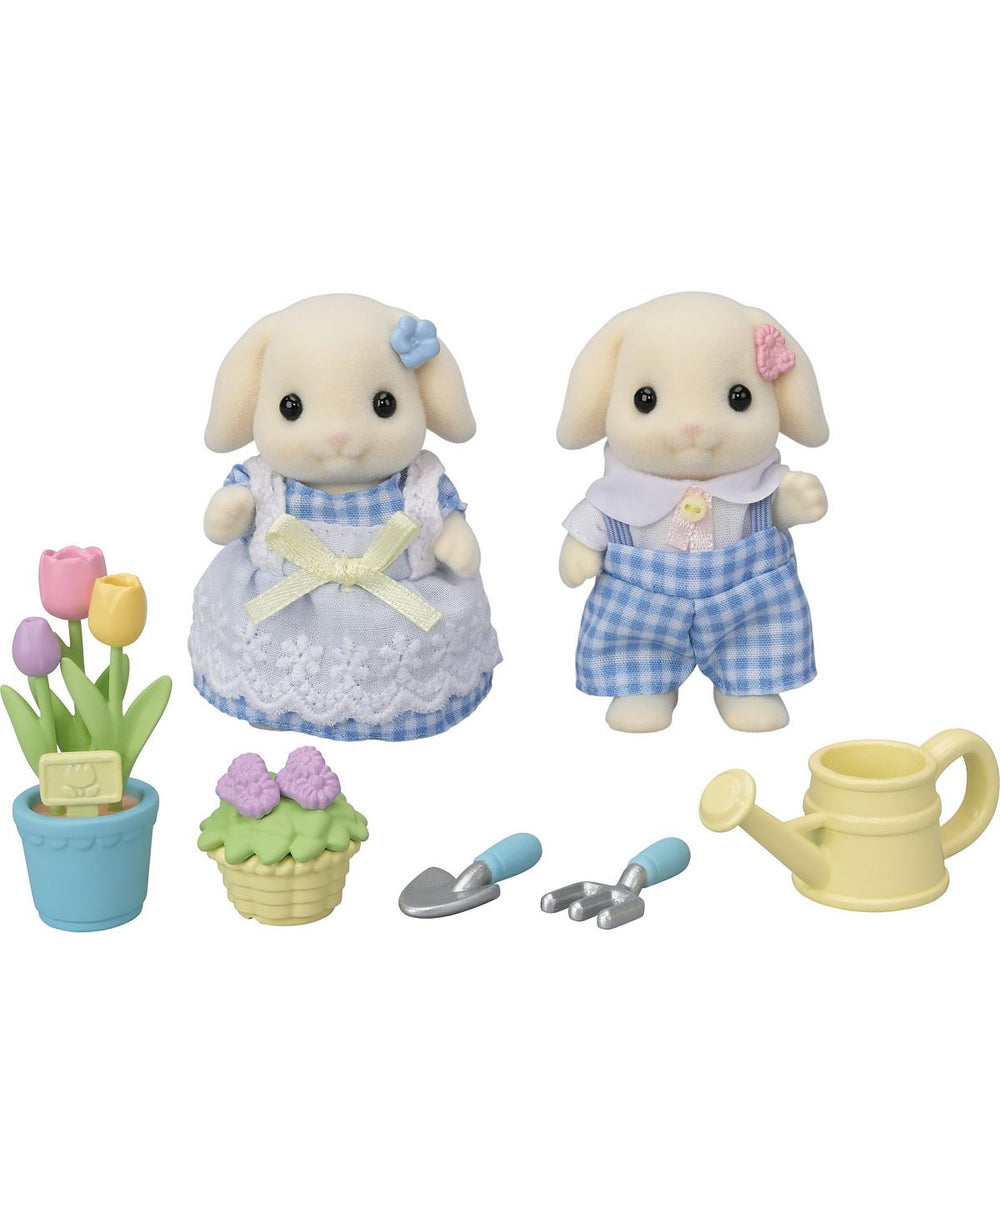 Calico Critters Blossom Gardening Set with Flora Rabbit Siblings